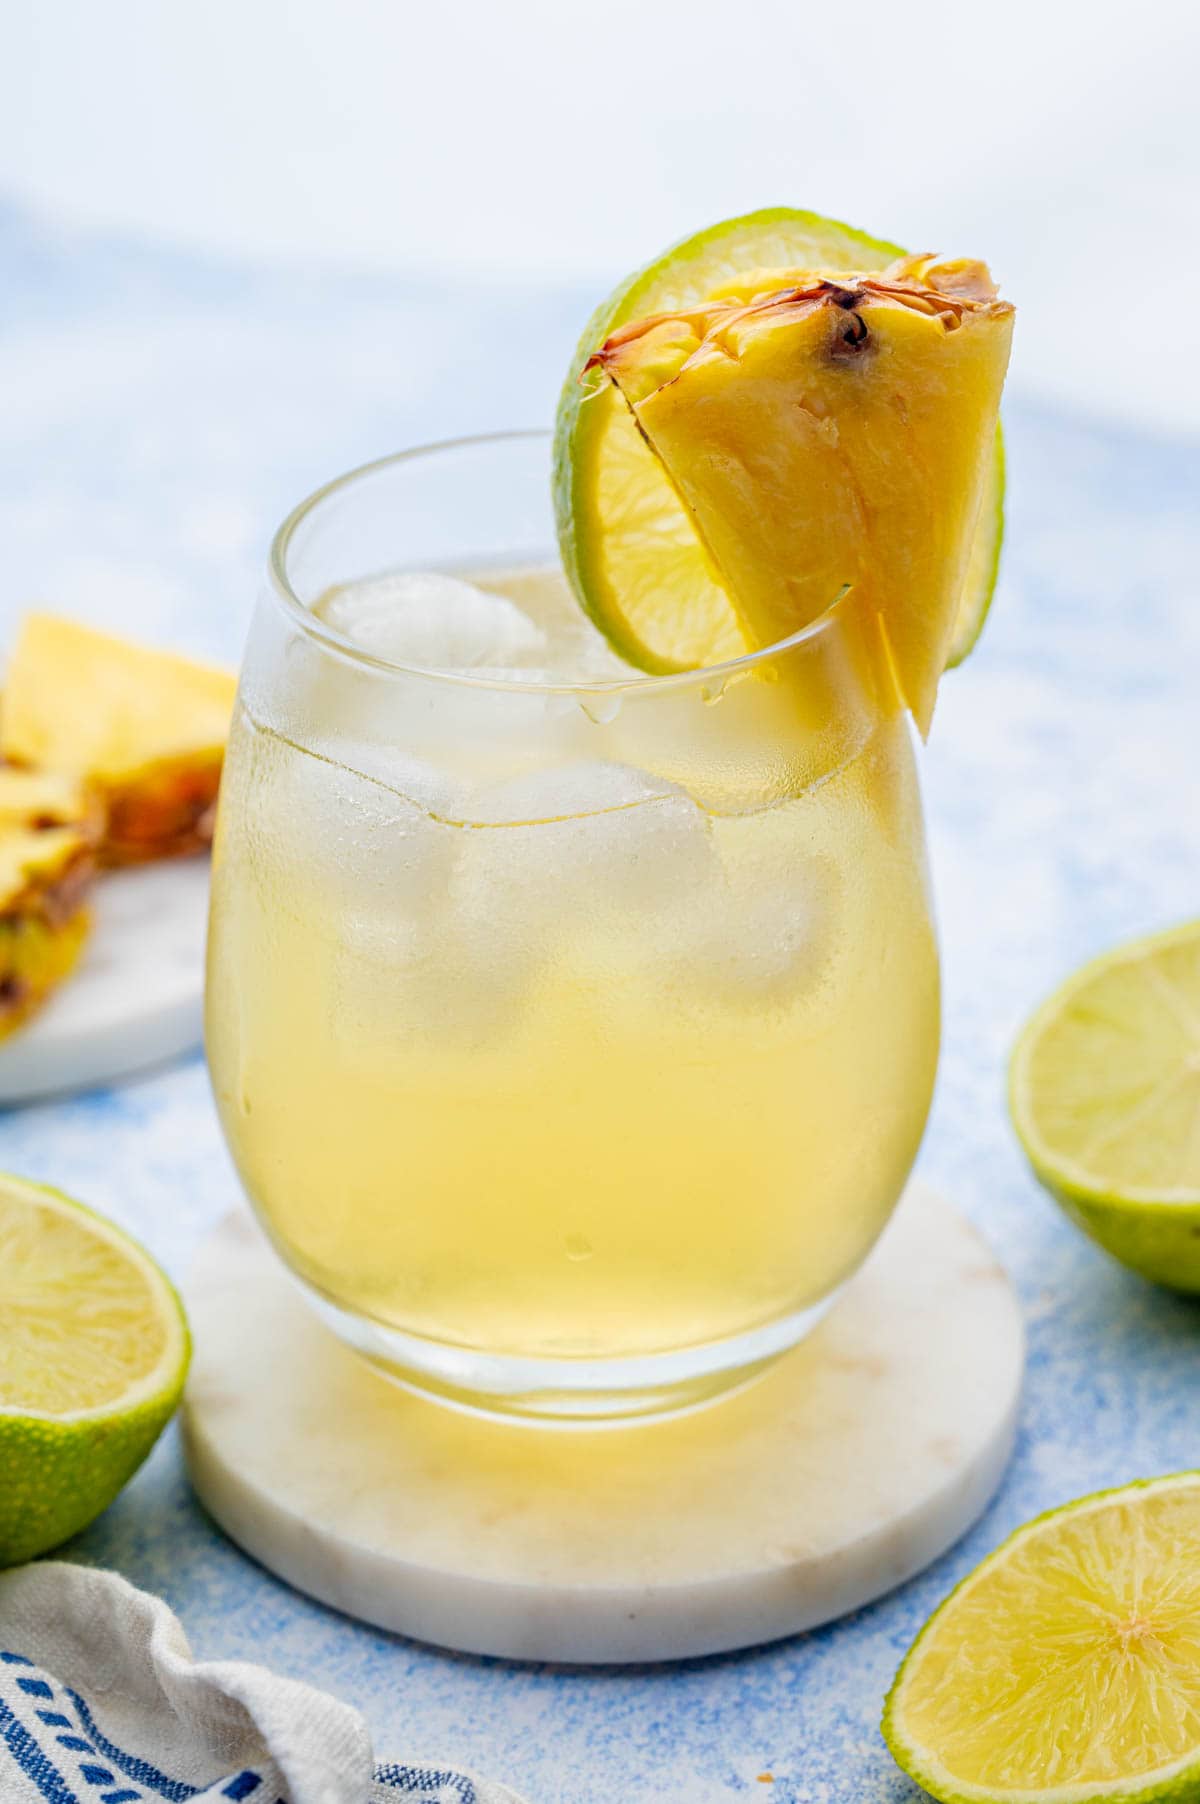 Pineapple vodka drink in a glass garnished with a pineapple wedge and a lime slice.